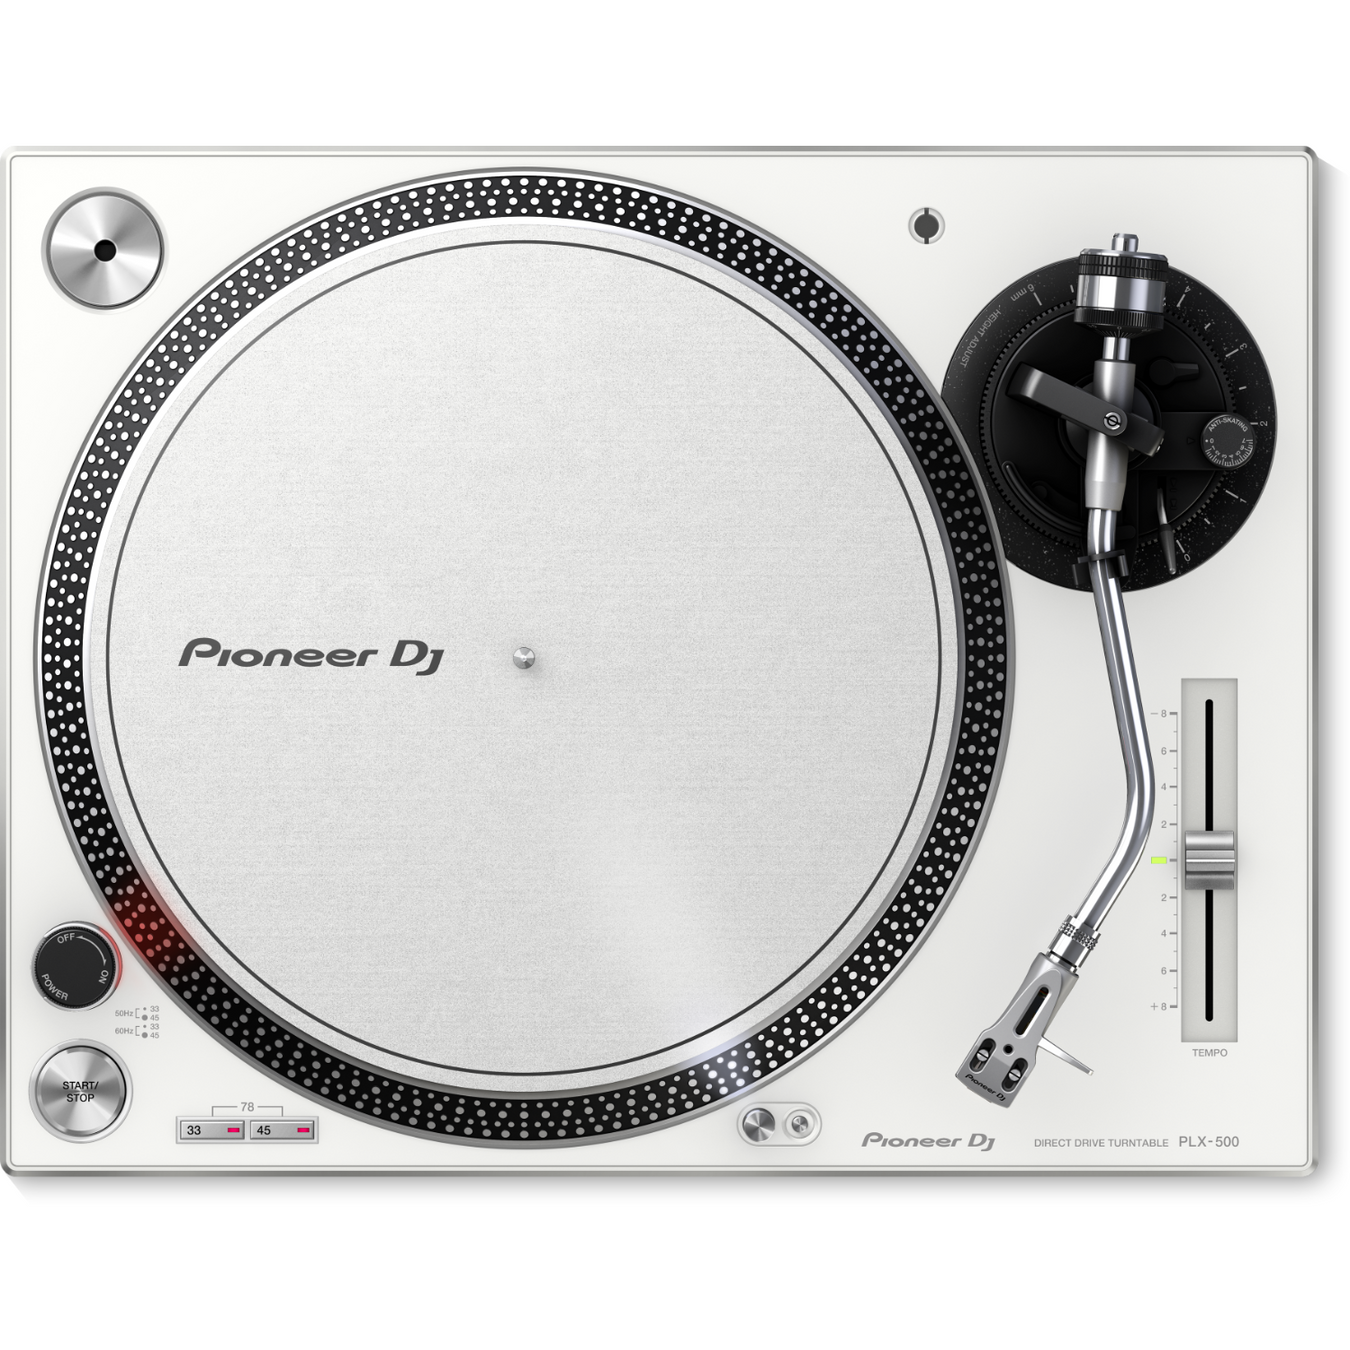 Top DJ Accessories For Playing On Turntables